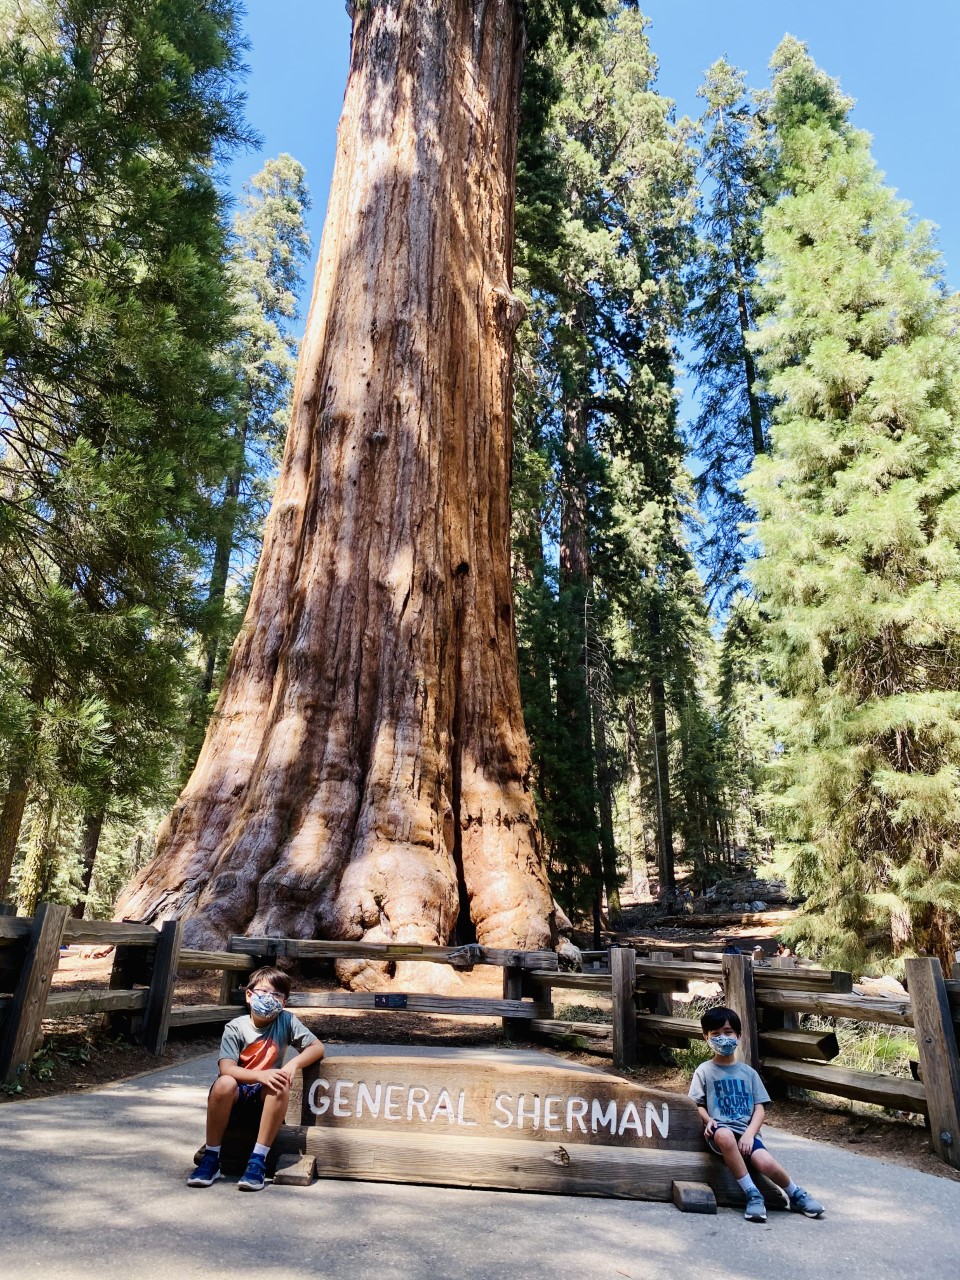 Two children wearing masks sit on a sign reading "General Sherman Tree" in front of a giant reddish tree.